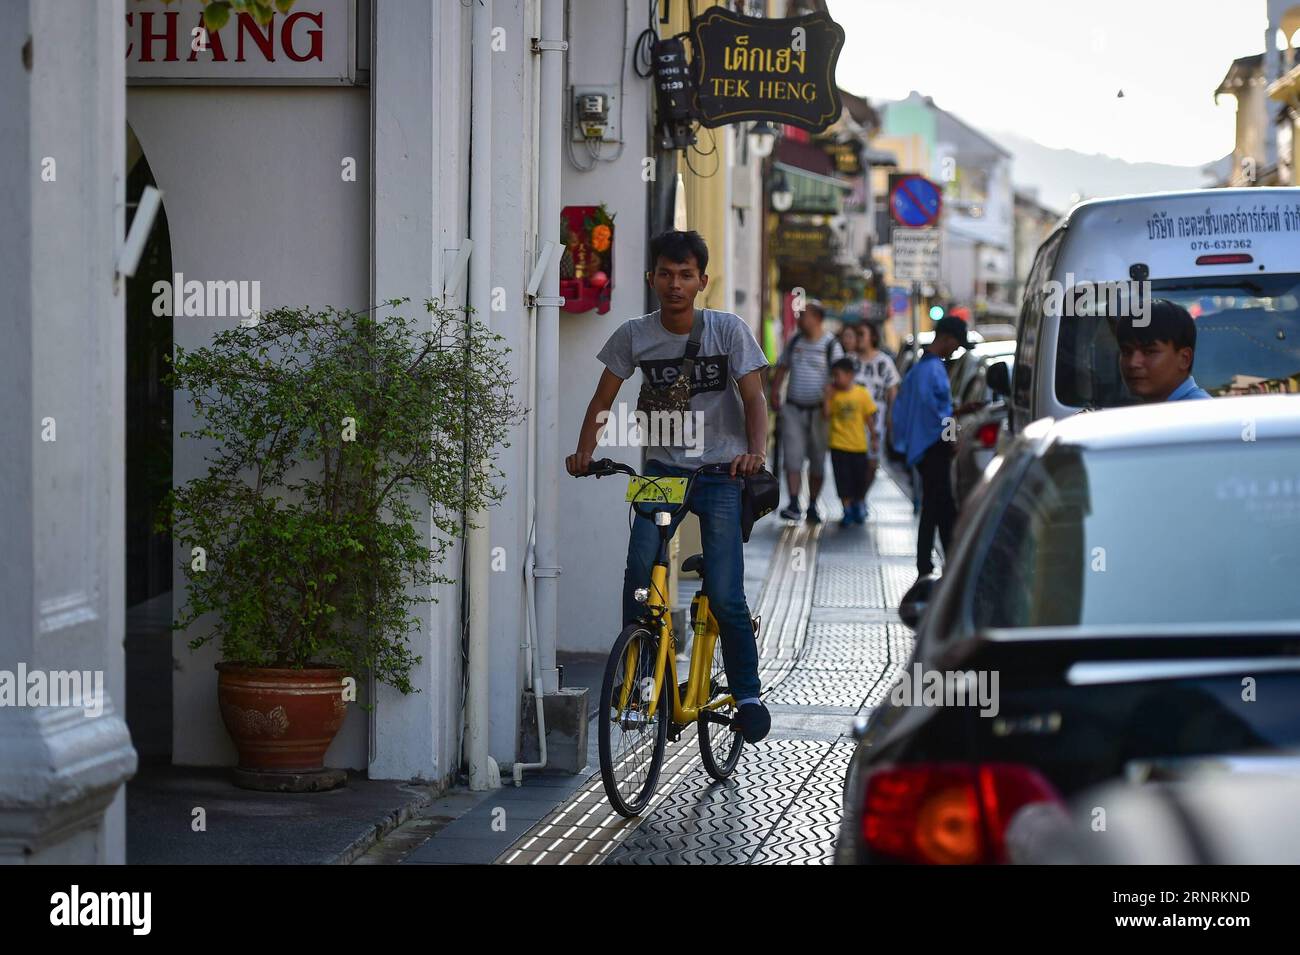 (171007) -- PHUKET, Oct. 7, 2017 -- A man rides an ofo sharing-bike at a commercial area in Phuket, Thailand, Oct. 5, 2017. China s dock-less bike-sharing company ofo provided more than 1,000 bikes in Phuket s key locations in late September and offered a 1-month free trial without deposit fee. Now the bike-sharing service has benefited local residents and tourists. Ofo s regular service fee will be charged at 5 Baht per 30 minutes usage, with a deposit fee of 99 Baht. )(zhf) THAILAND-PHUKET-CHINA-BIKE-SHARING-OFO LixMangmang PUBLICATIONxNOTxINxCHN Stock Photo